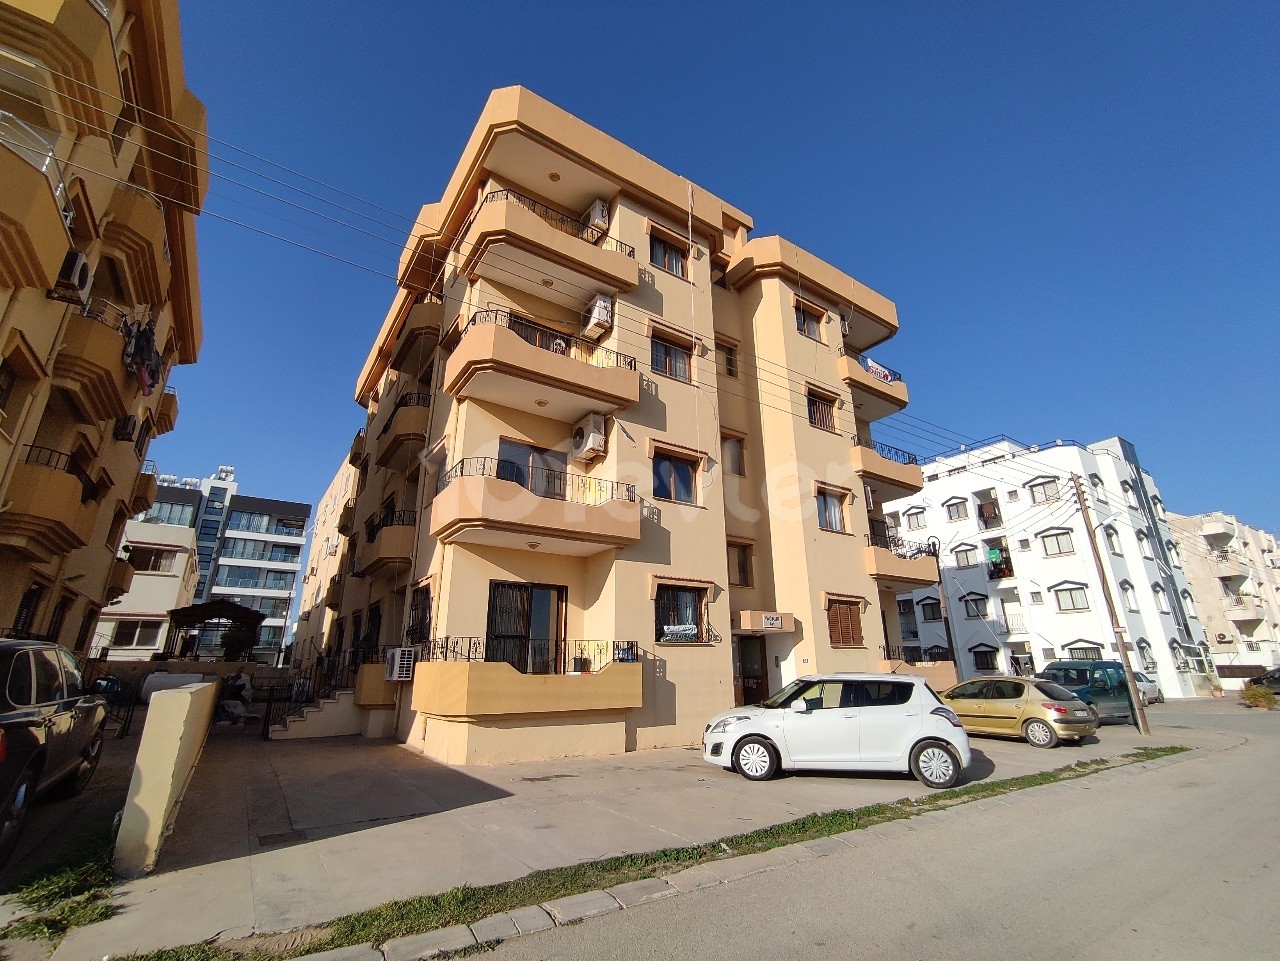 3+1 Flat for Rent in Gulseren, Famagusta from Özkaraman (Contract until the end of August)